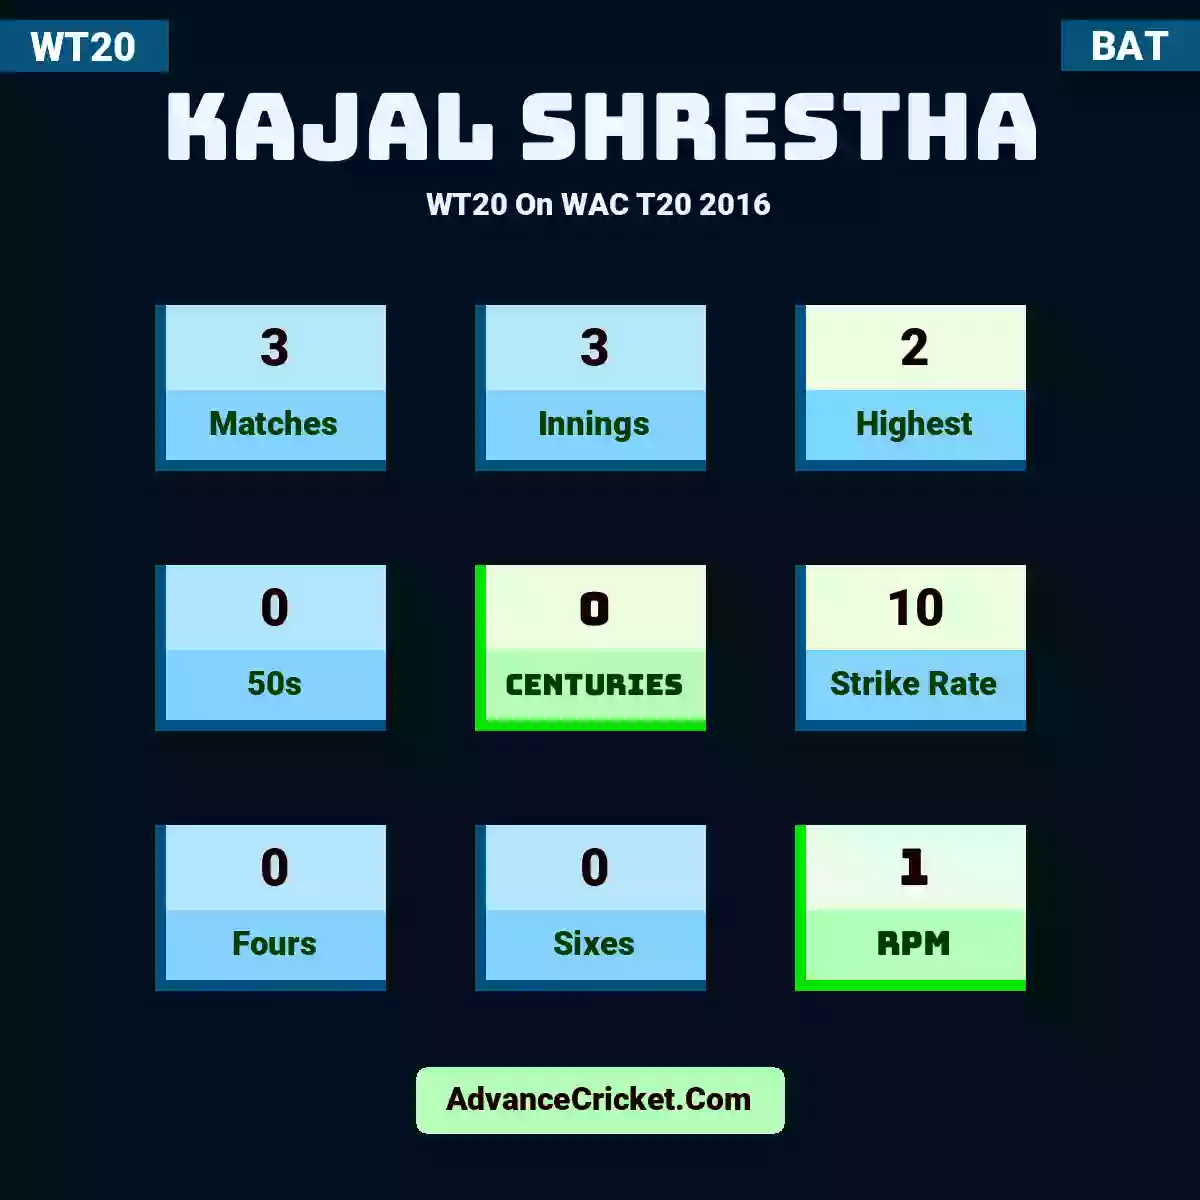 Kajal Shrestha WT20  On WAC T20 2016, Kajal Shrestha played 3 matches, scored 2 runs as highest, 0 half-centuries, and 0 centuries, with a strike rate of 10. K.Shrestha hit 0 fours and 0 sixes, with an RPM of 1.